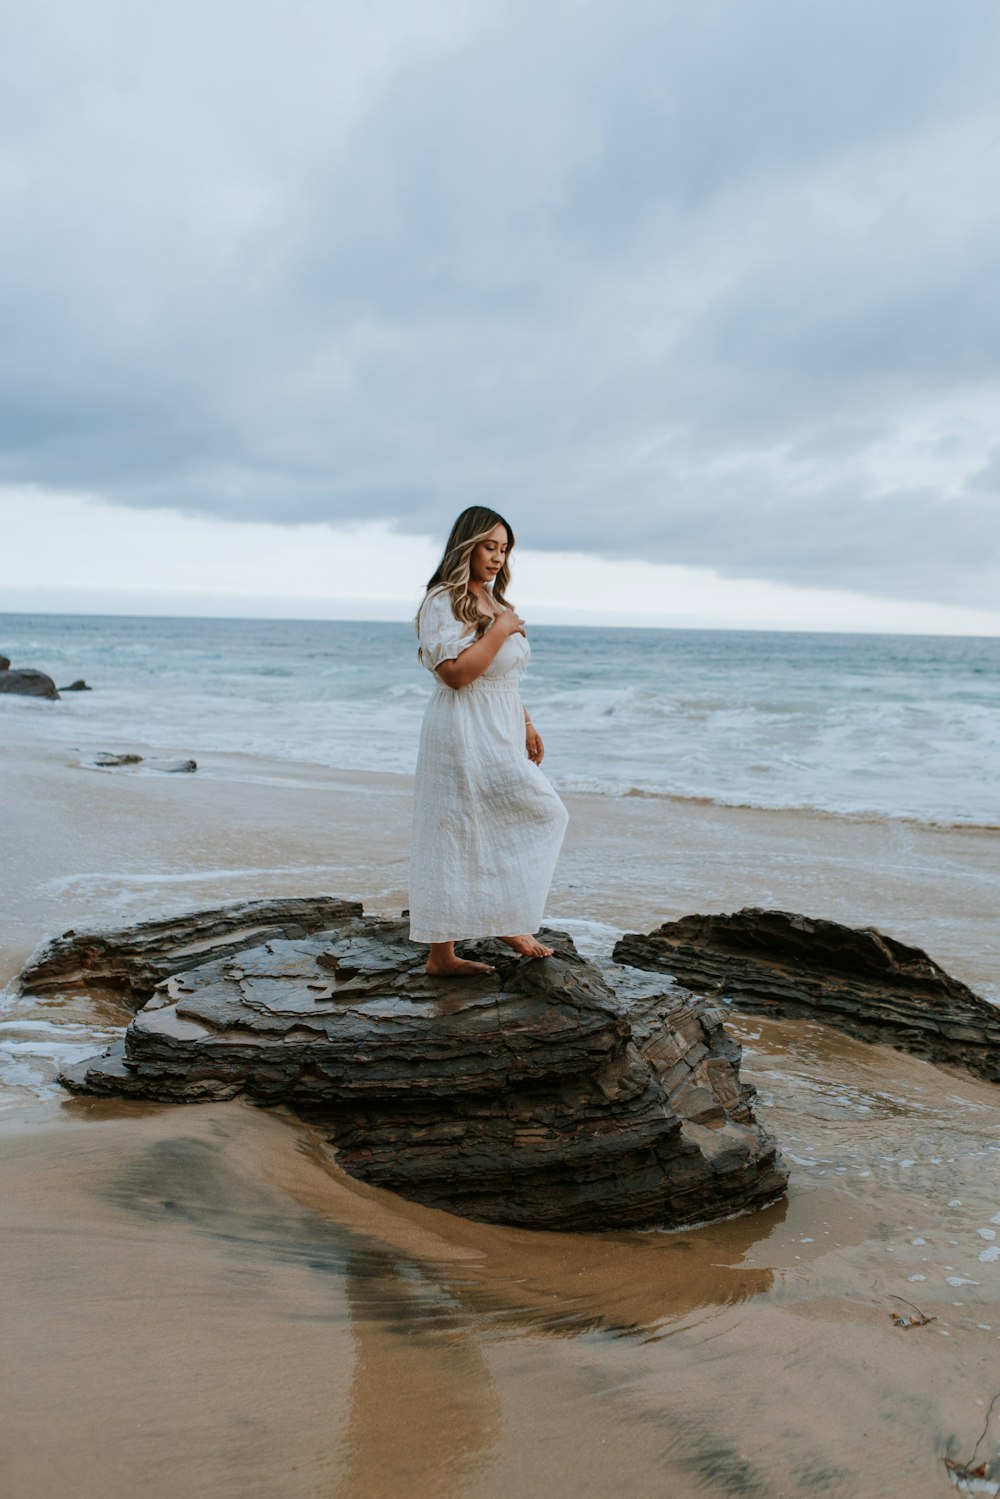 a person in a white dress standing on a rock by the water